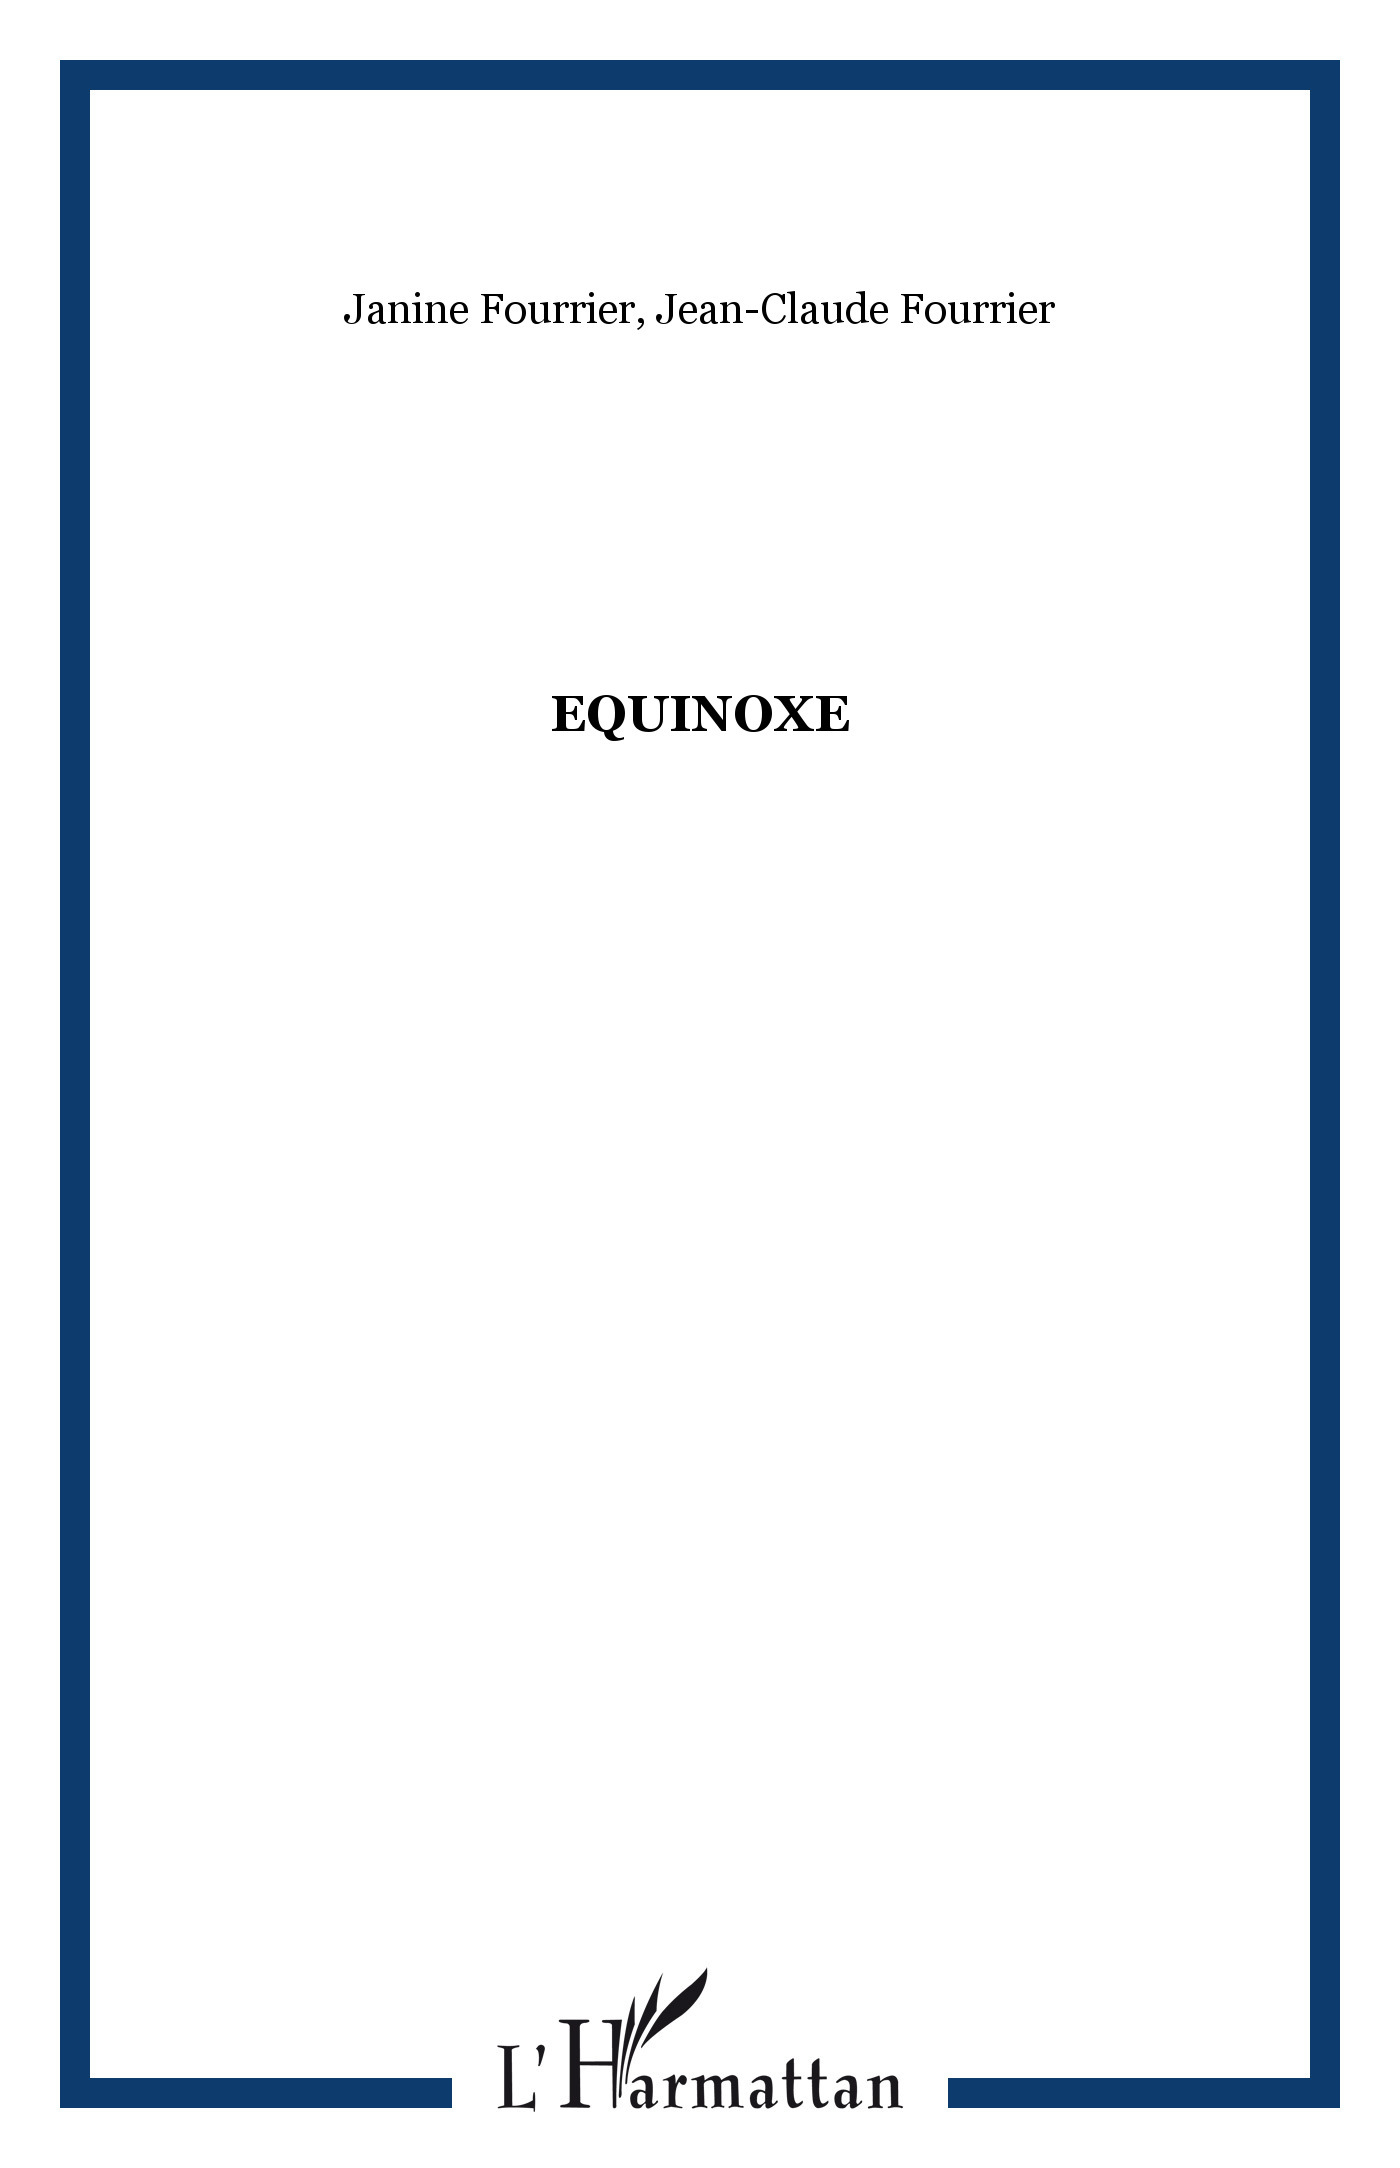 Equinoxe (9782876790759-front-cover)